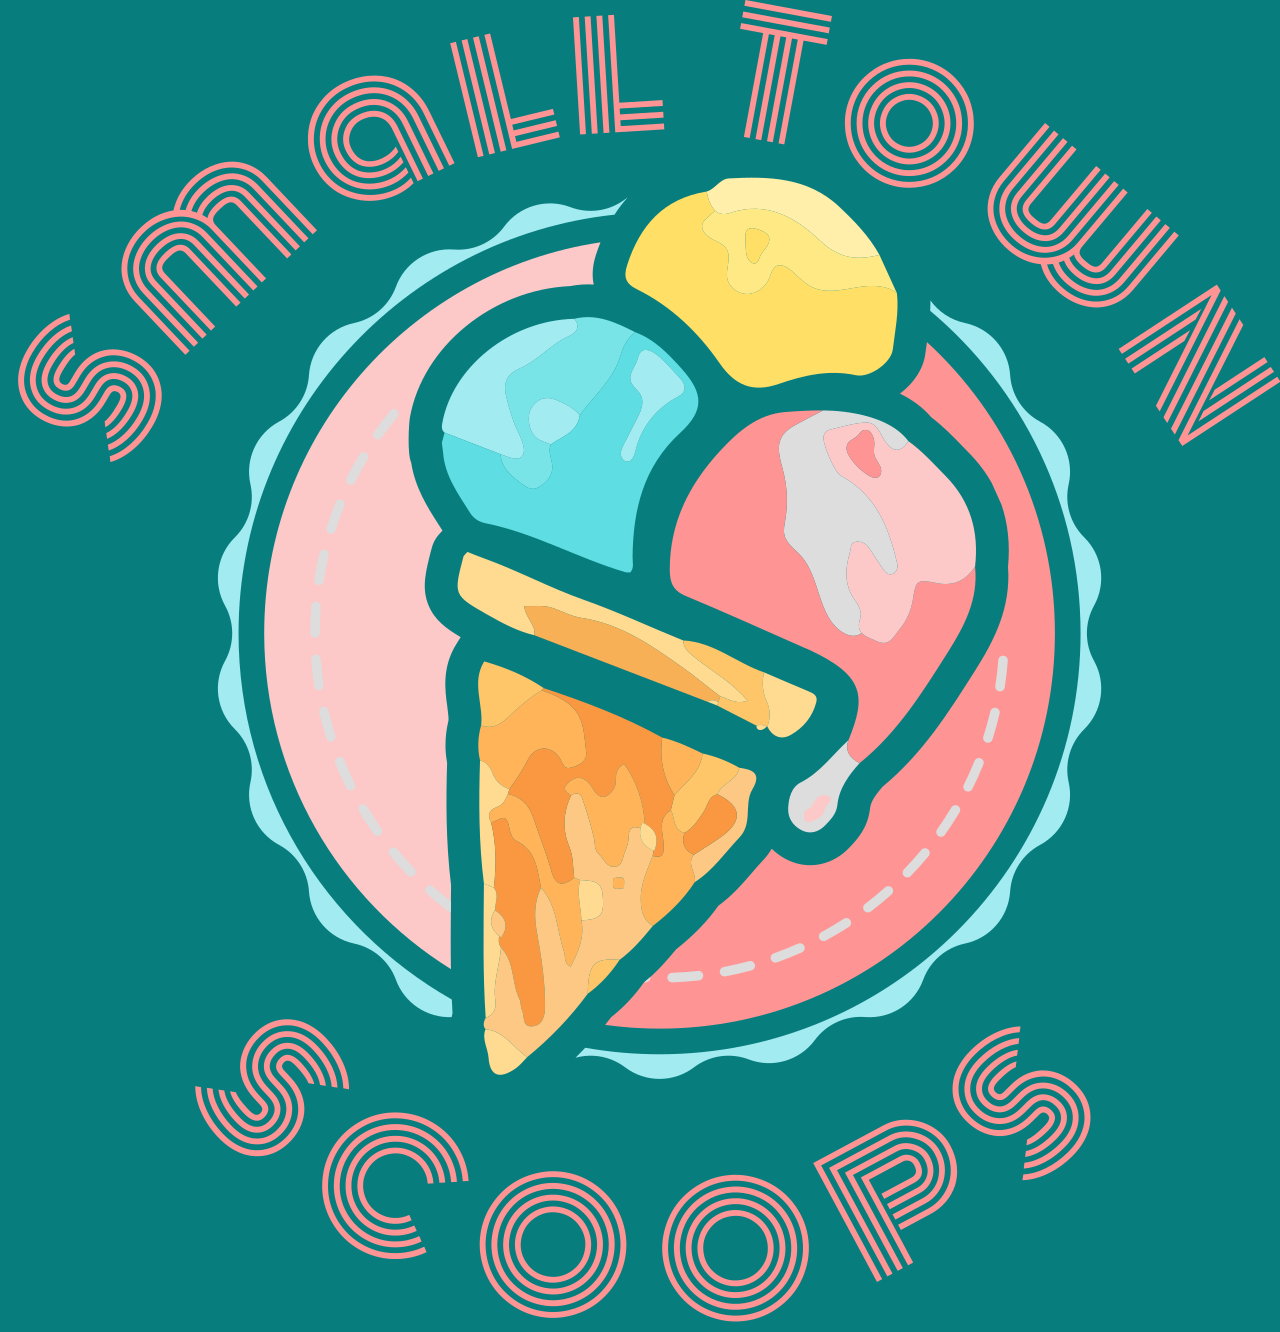 Small Town Scoops's web page